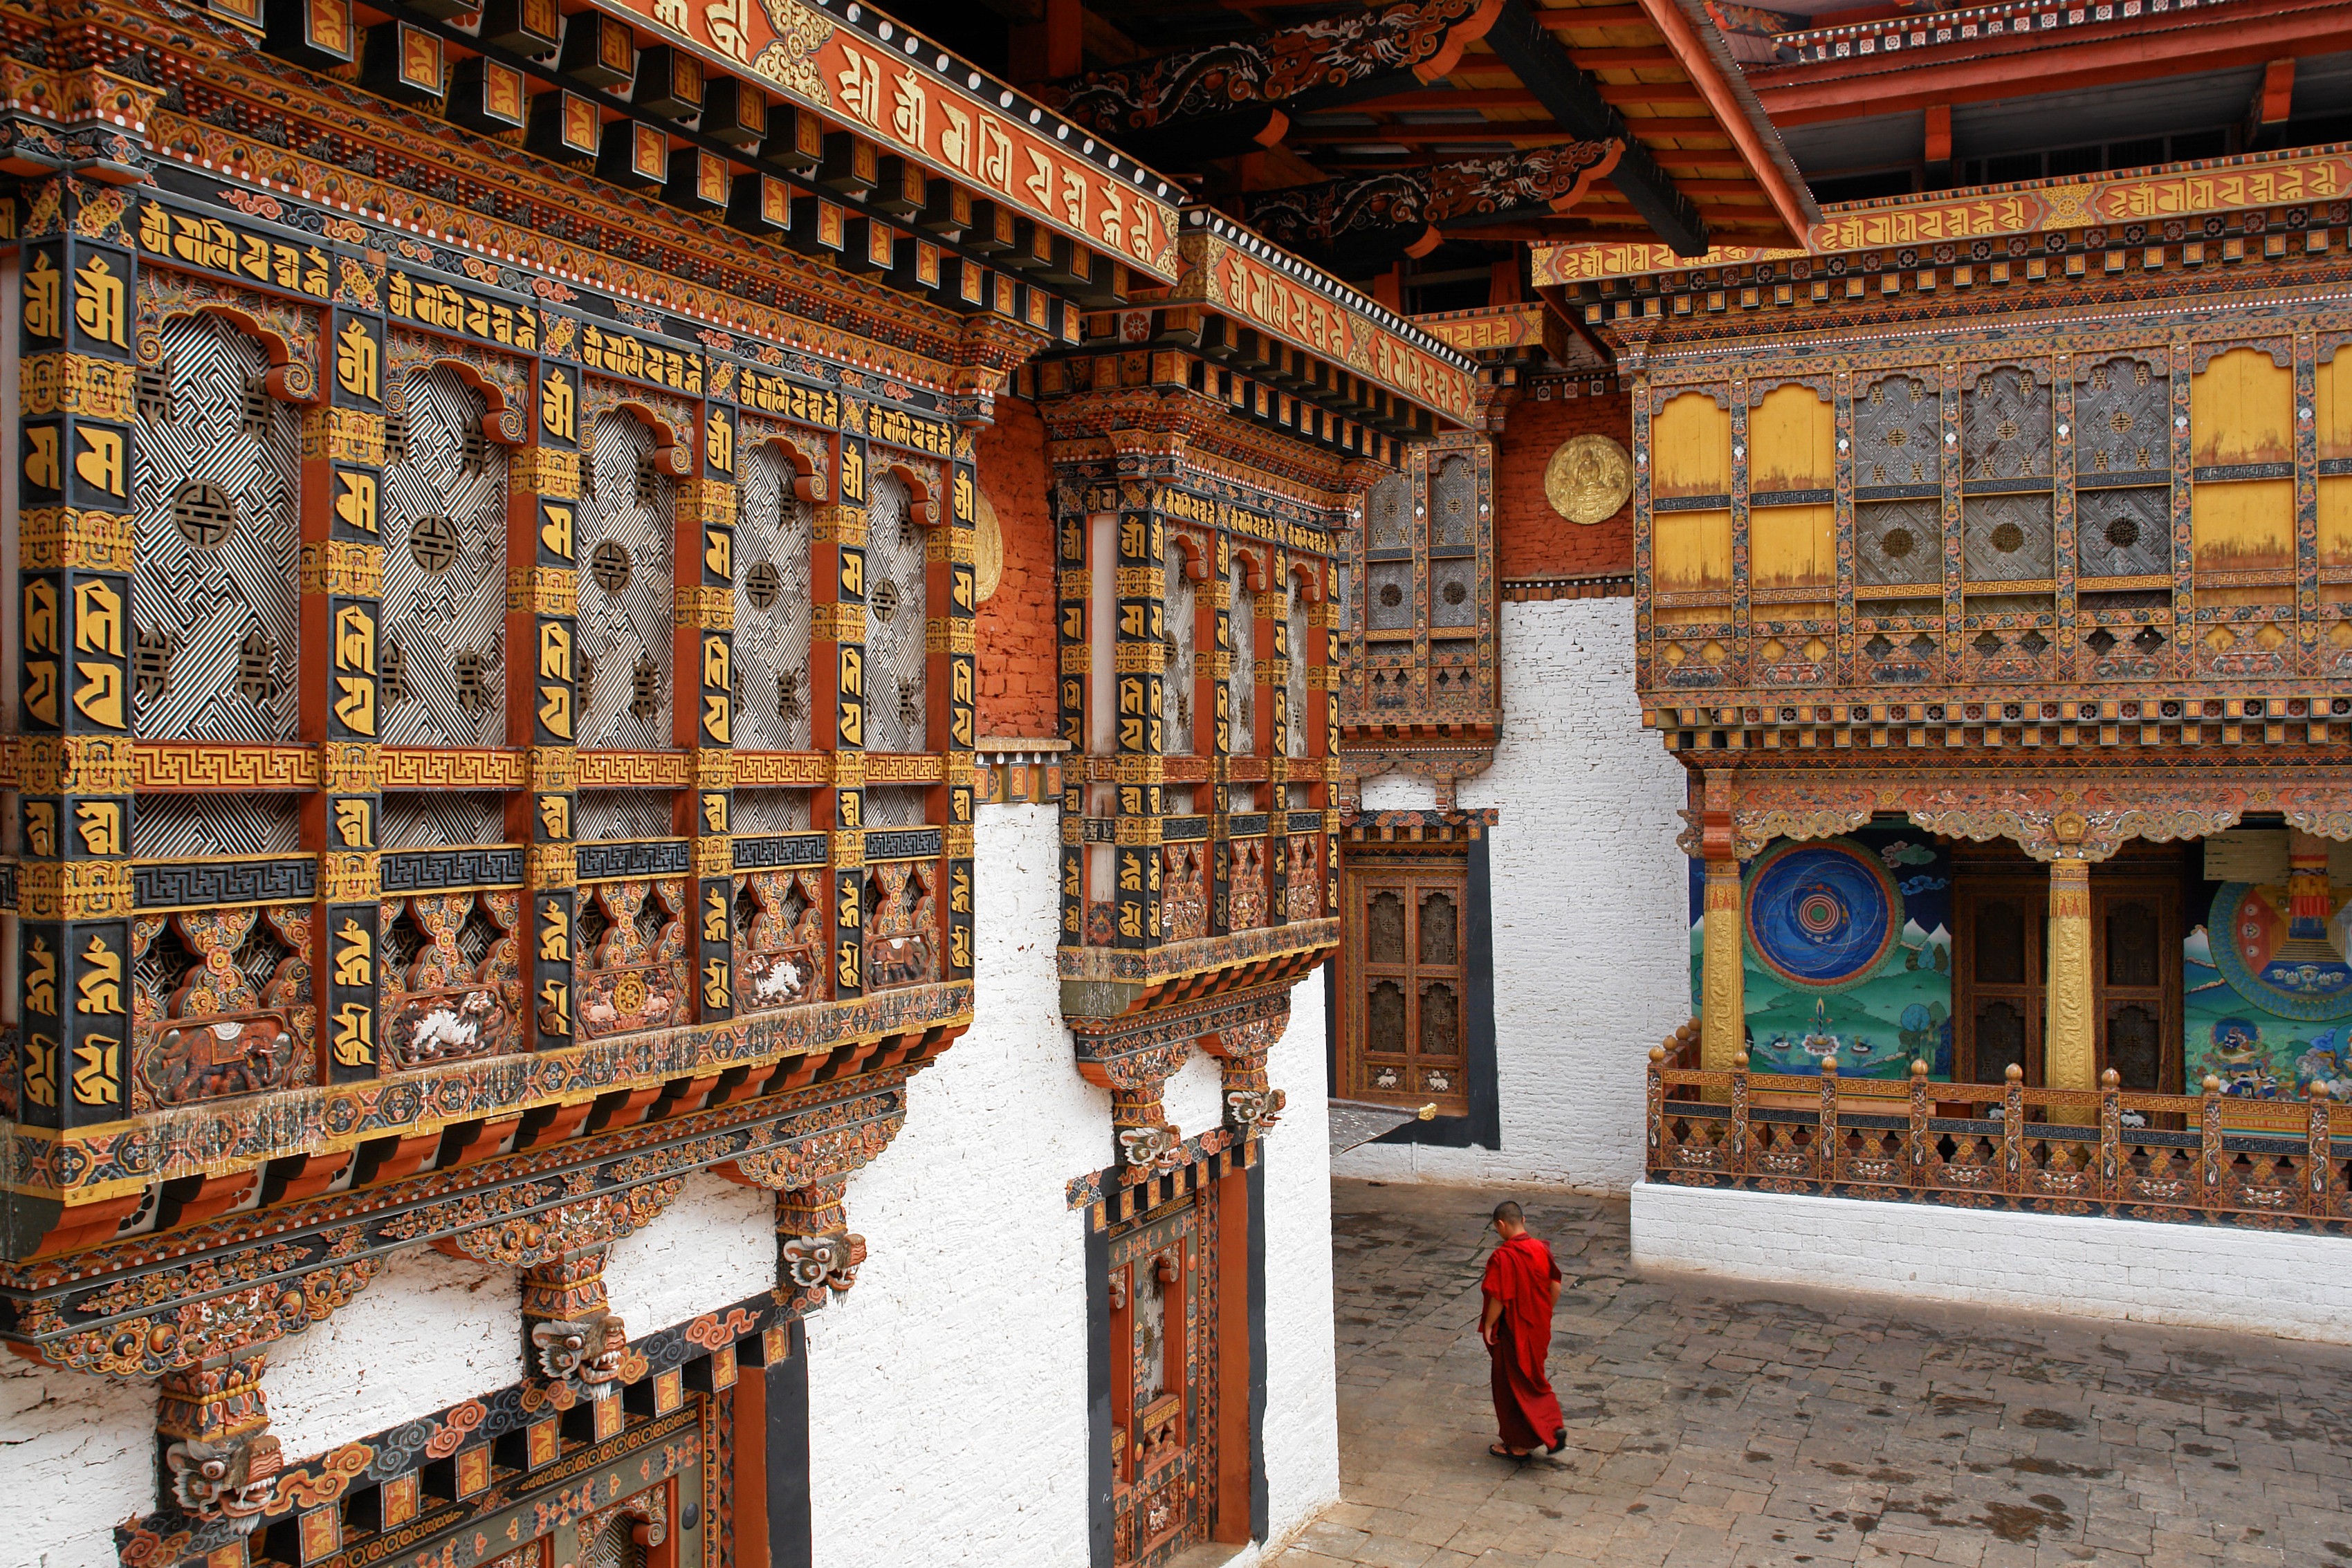 A temple in Punakha Dzong in Bhutan, which has been named the best country to visit in 2020 by the Lonely Planet guide. Photo: Getty